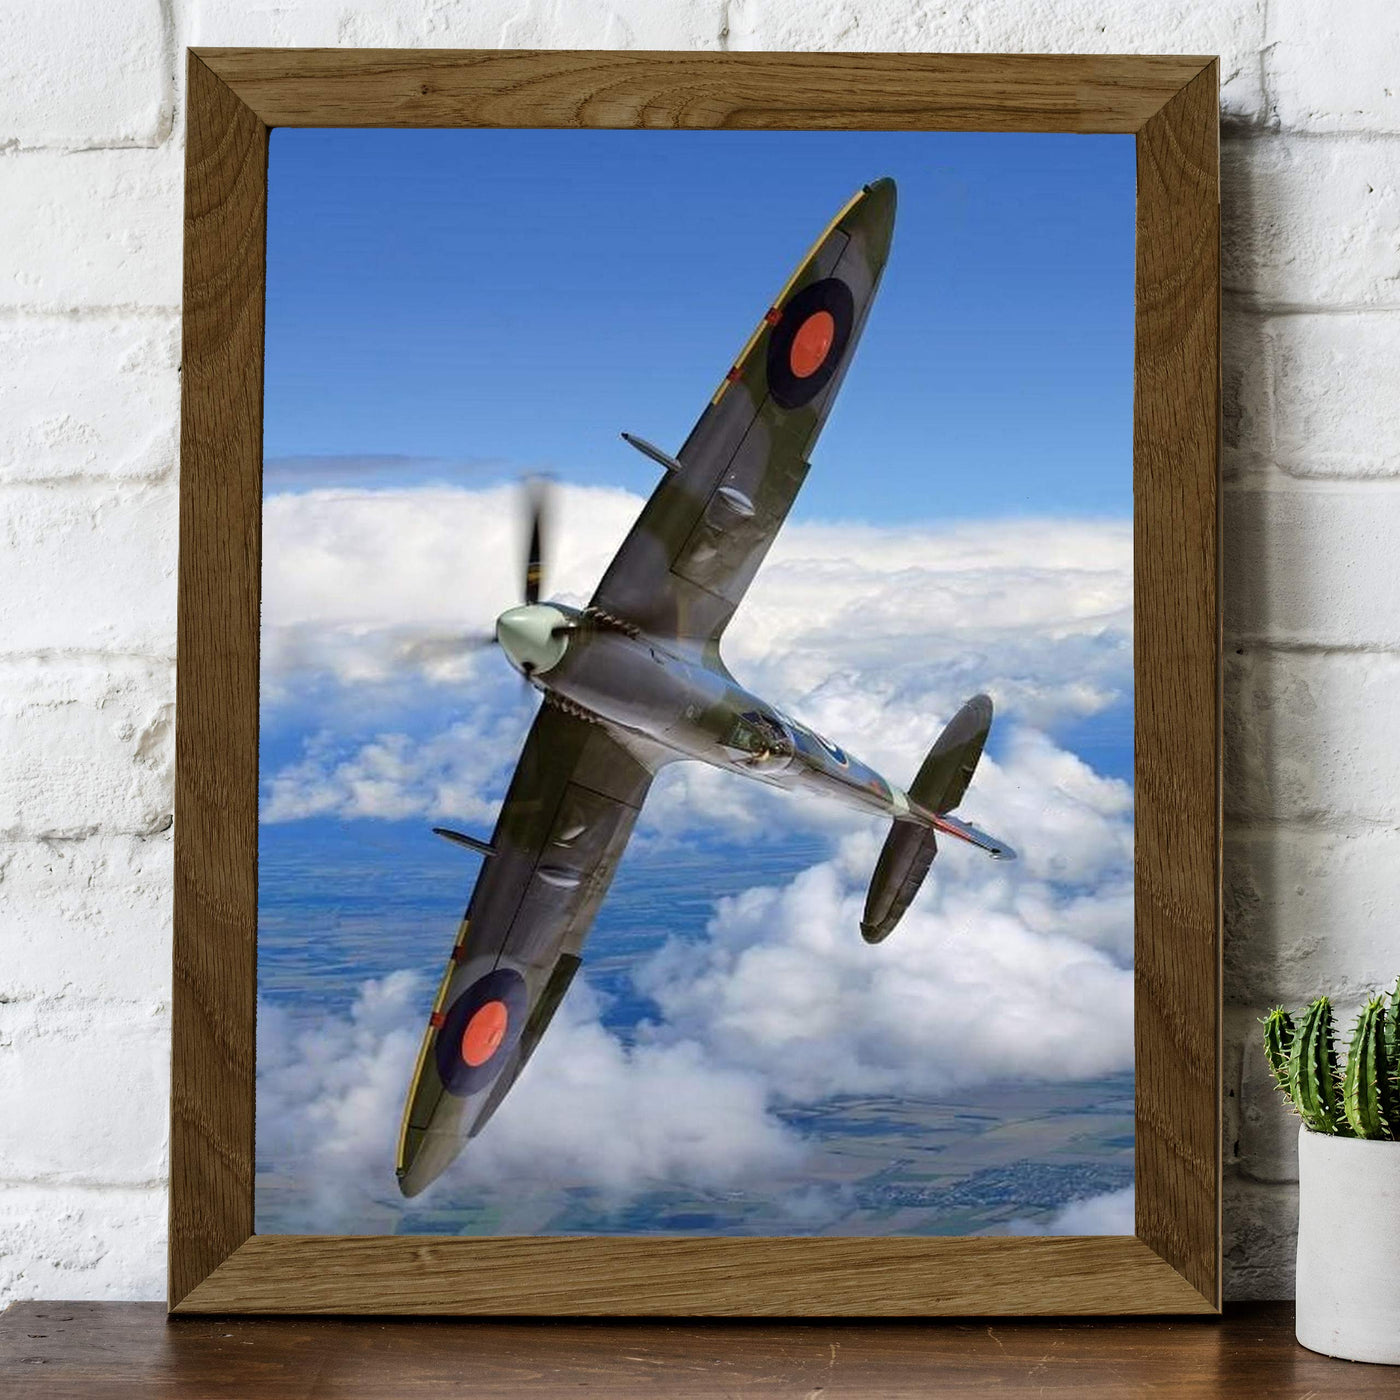 Supermarine Spitfire MK IX -British Fighter Jet Poster Print -8x10" Military Aircraft Wall Decor Image-Ready to Frame. Home-Office-Military School Decor. Perfect Sign for Game Room-Garage-Cave Decor!